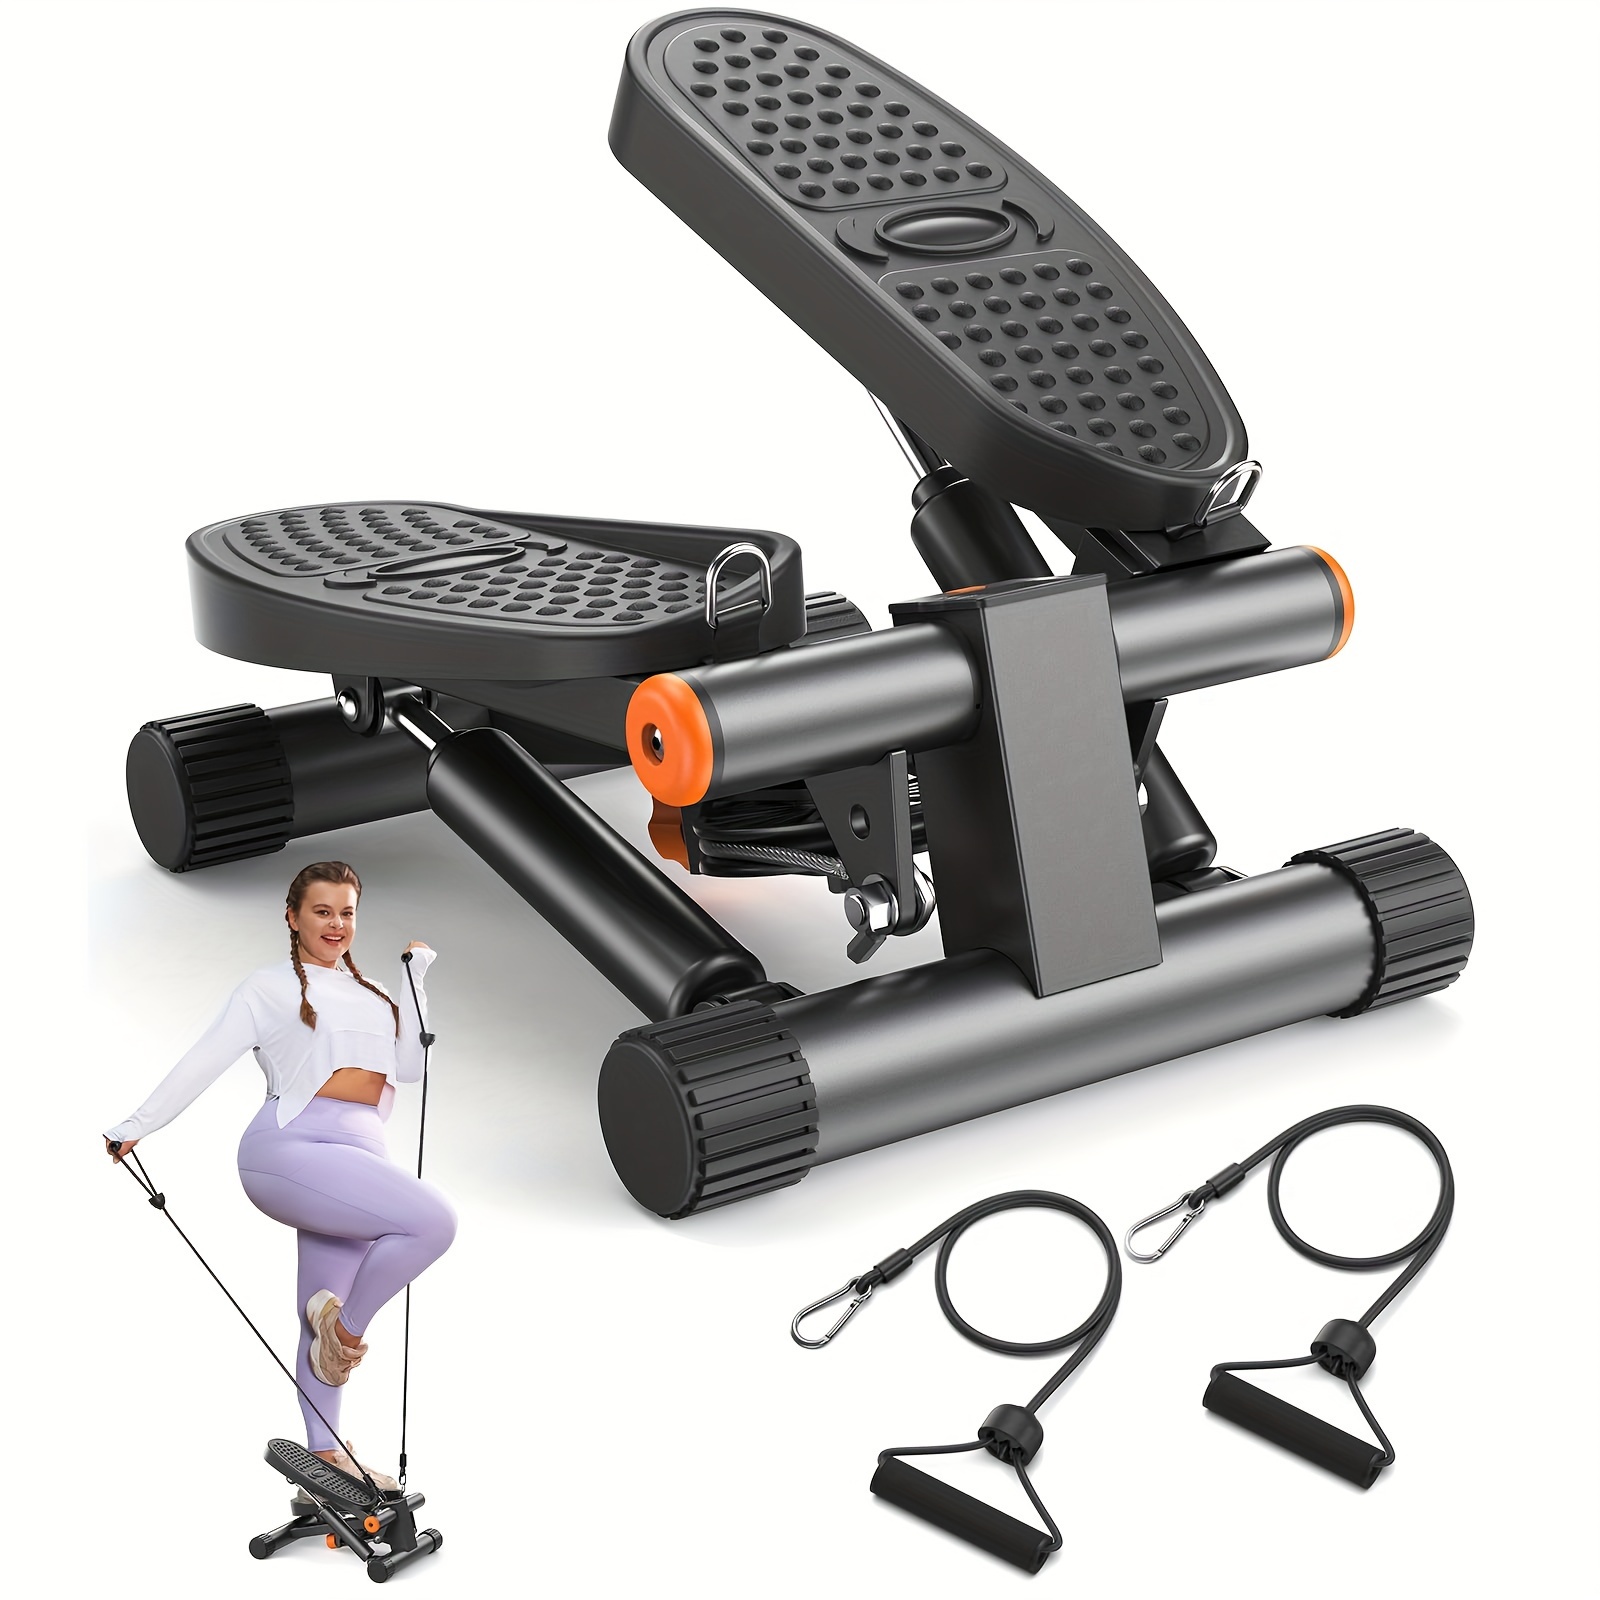 

1pc Fitness Stepper, Pedal Exercise Machine With & Lcd Monitor, 300lbs Loading Capacity, For Leg Training, Body Workout